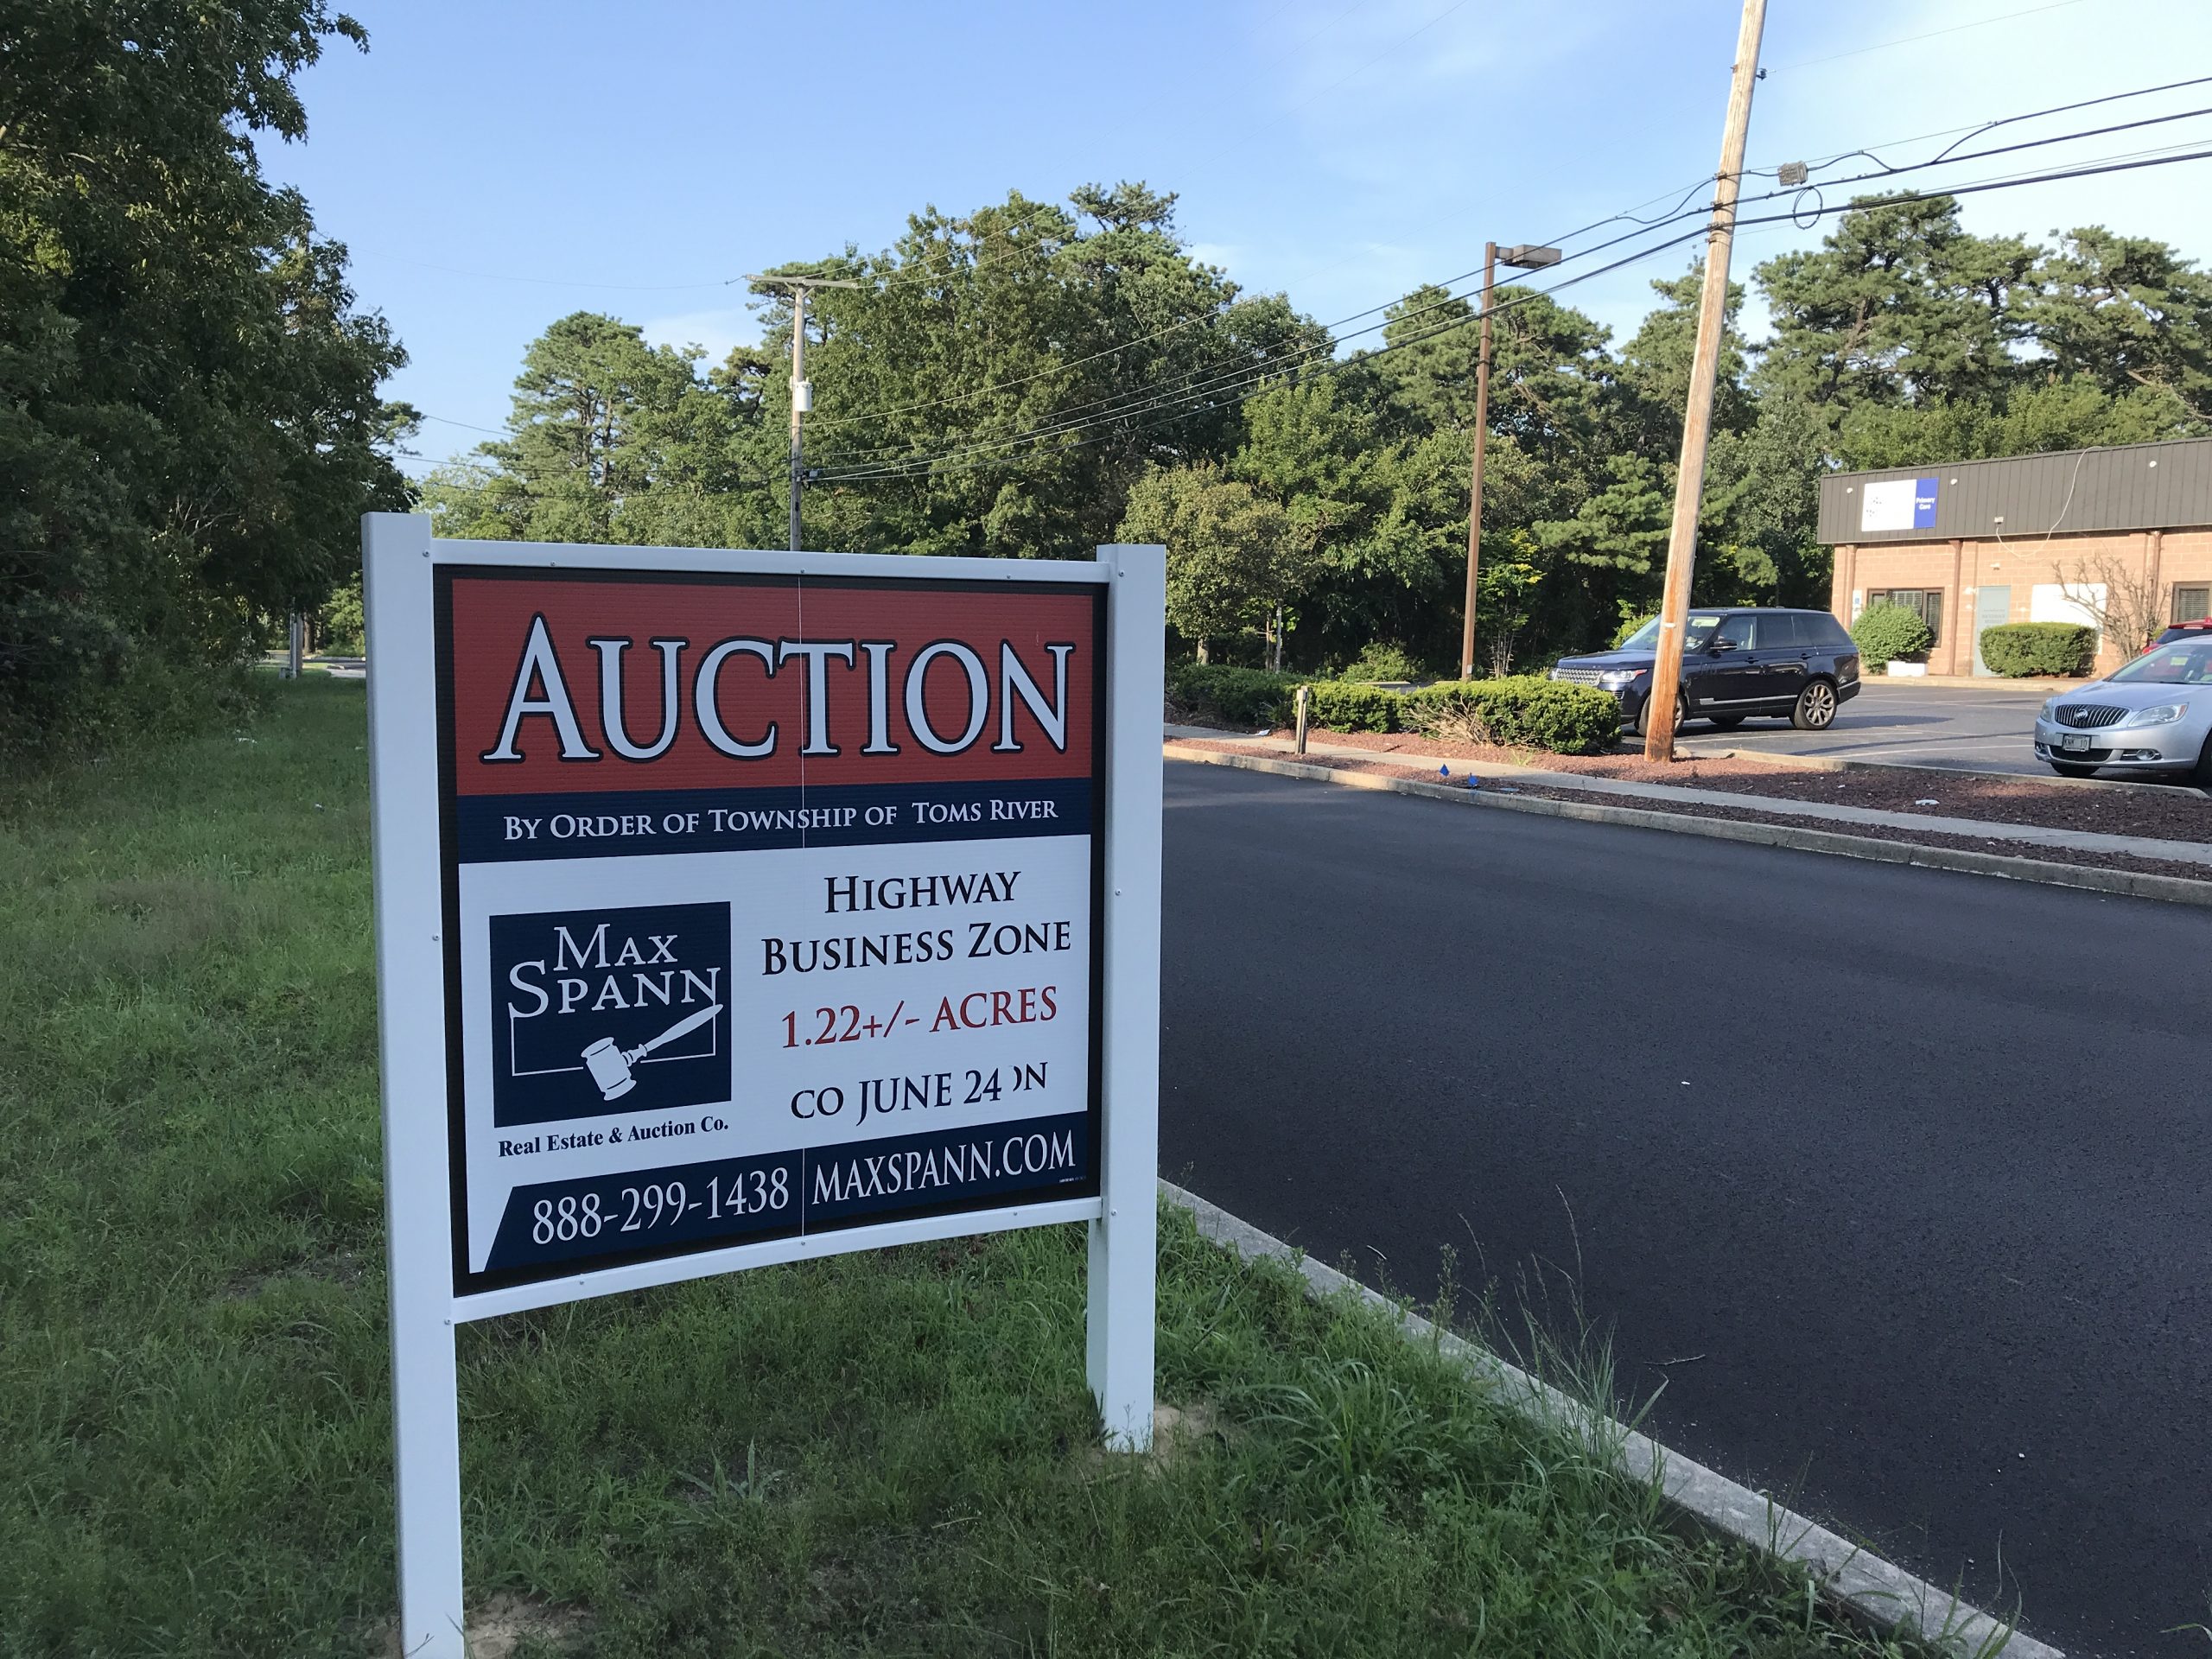 The property at 1870 Hinds Road, Toms River, Aug. 2020. (Photo: Daniel Nee)